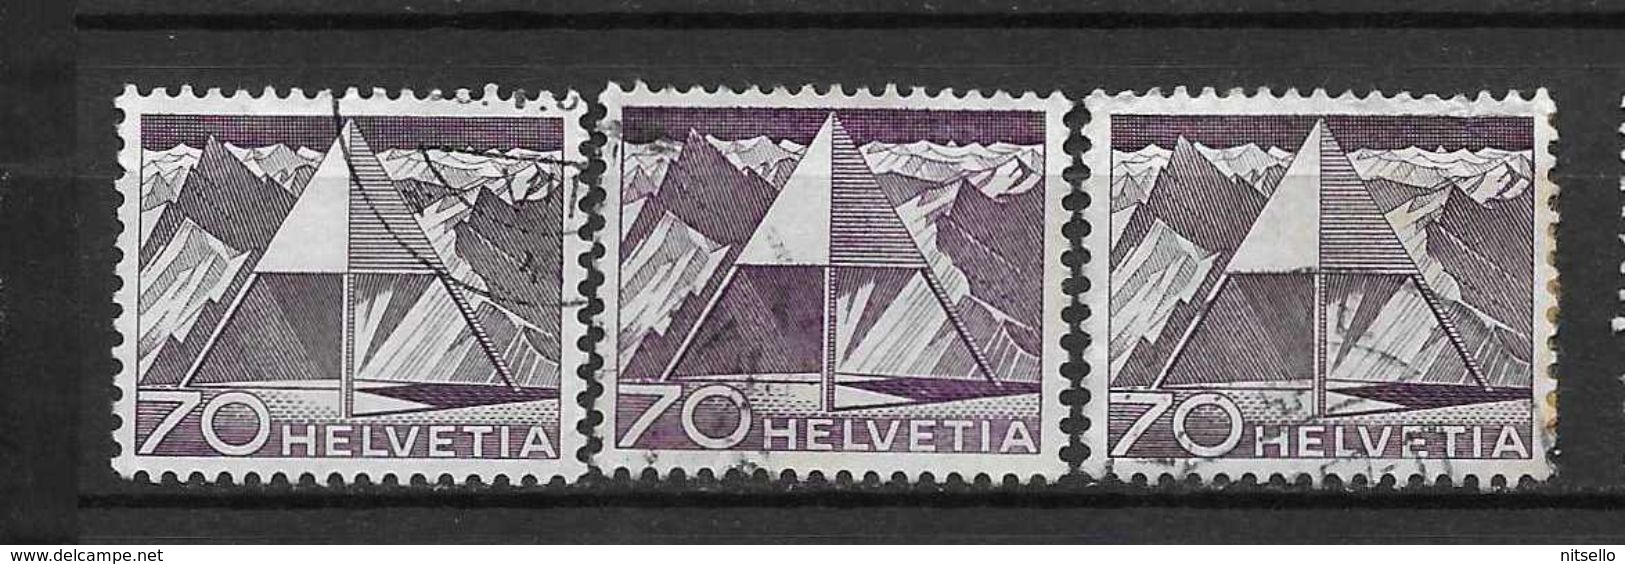 LOTE 1583  ///  SUIZA     YVERT Nº: 492   ¡¡¡¡¡ LIQUIDATION !!!!!!! - Used Stamps